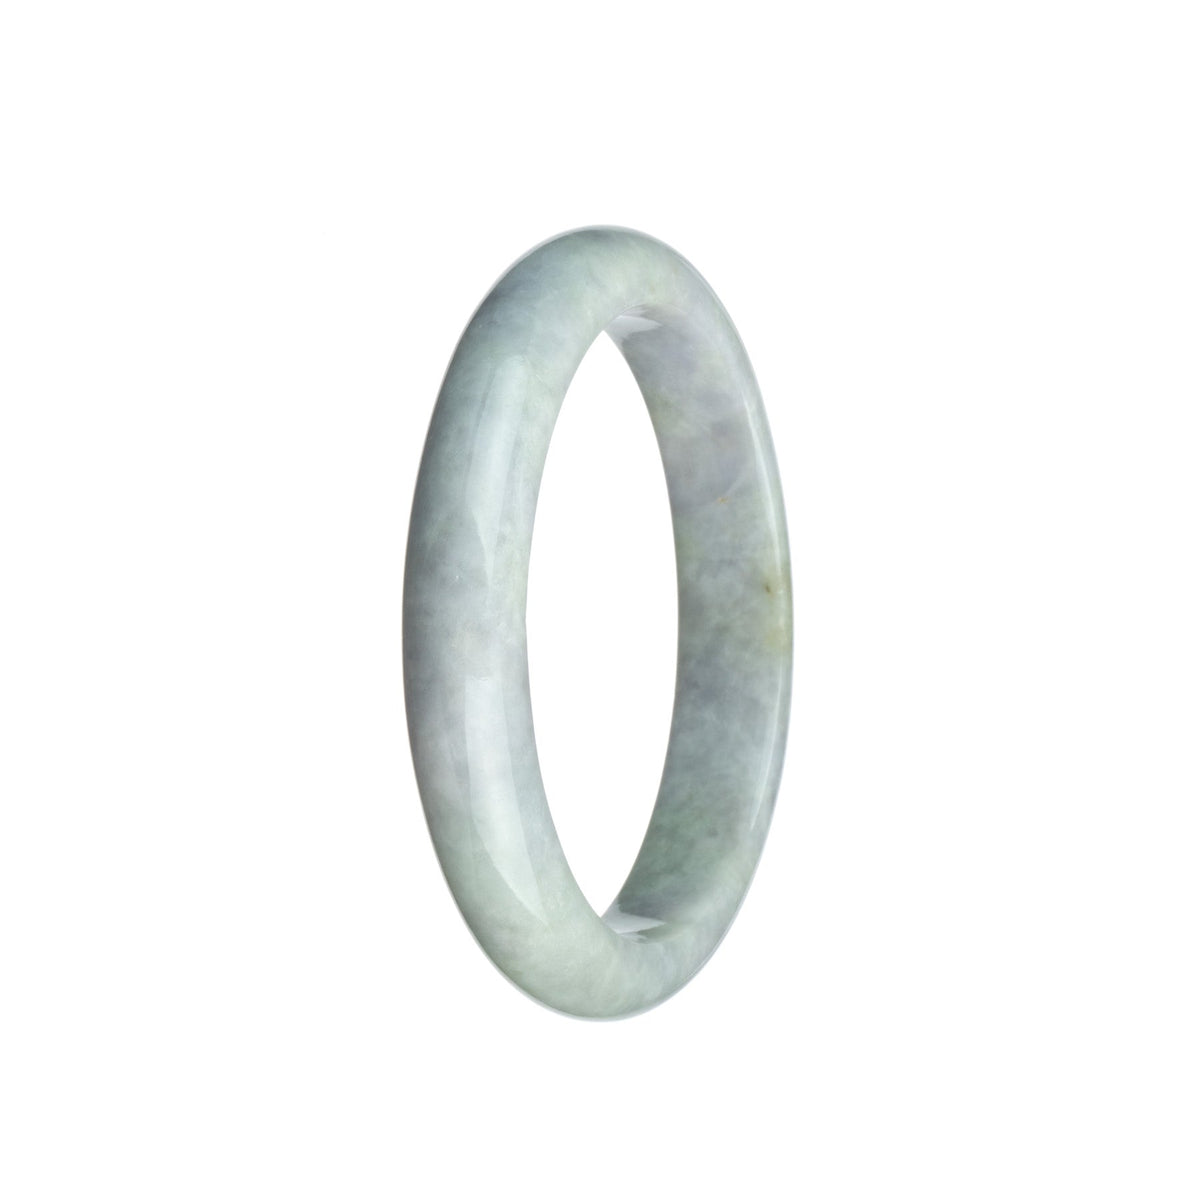 A beautiful lavender jadeite bracelet with a half moon design, made from genuine Type A jade.